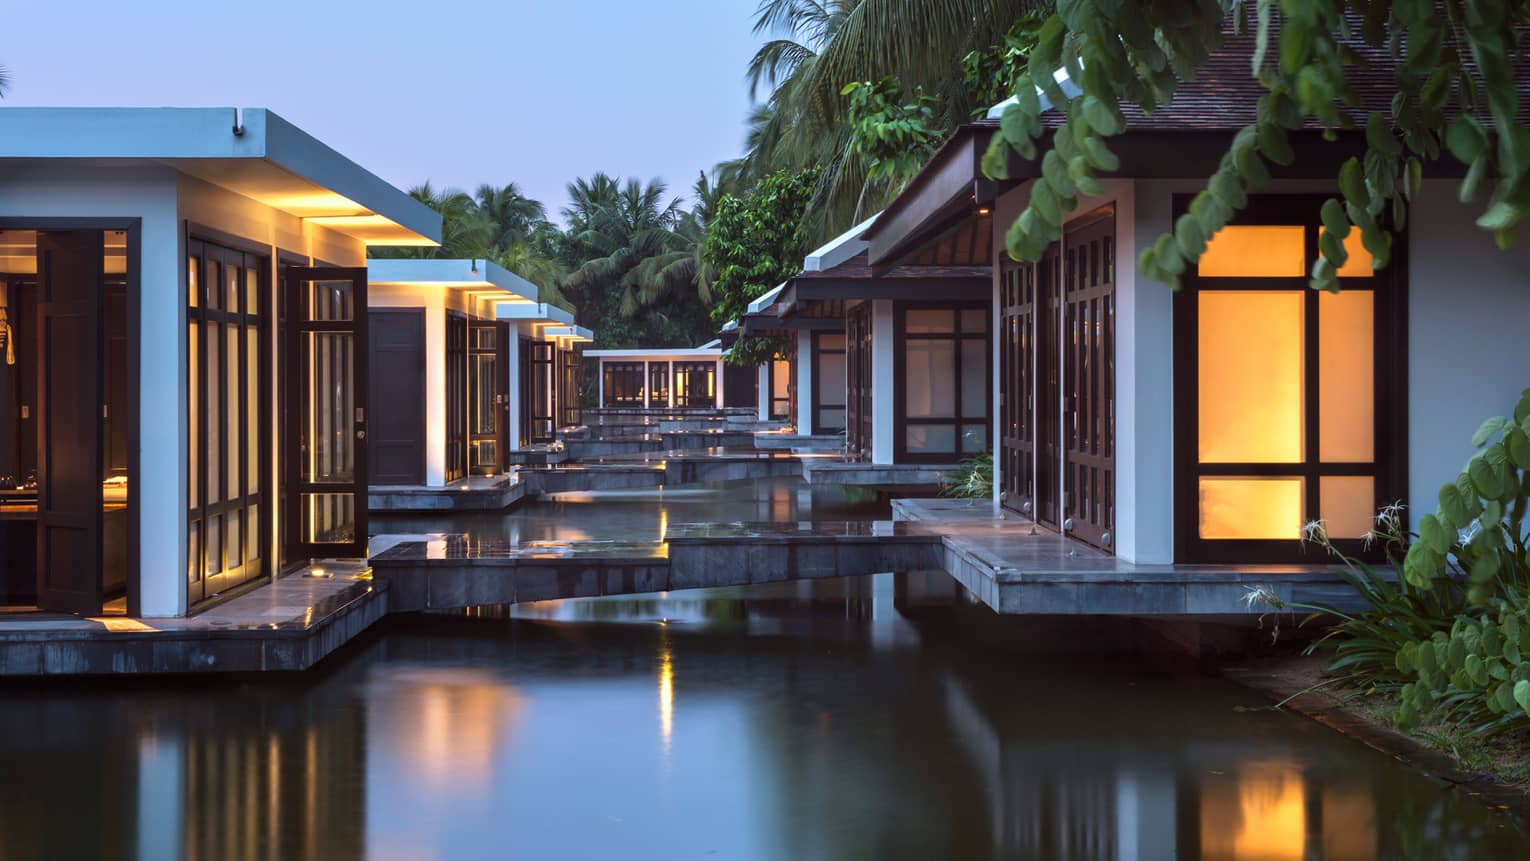 Spa villas over lotus pond connected by marble tile walkways at dusk